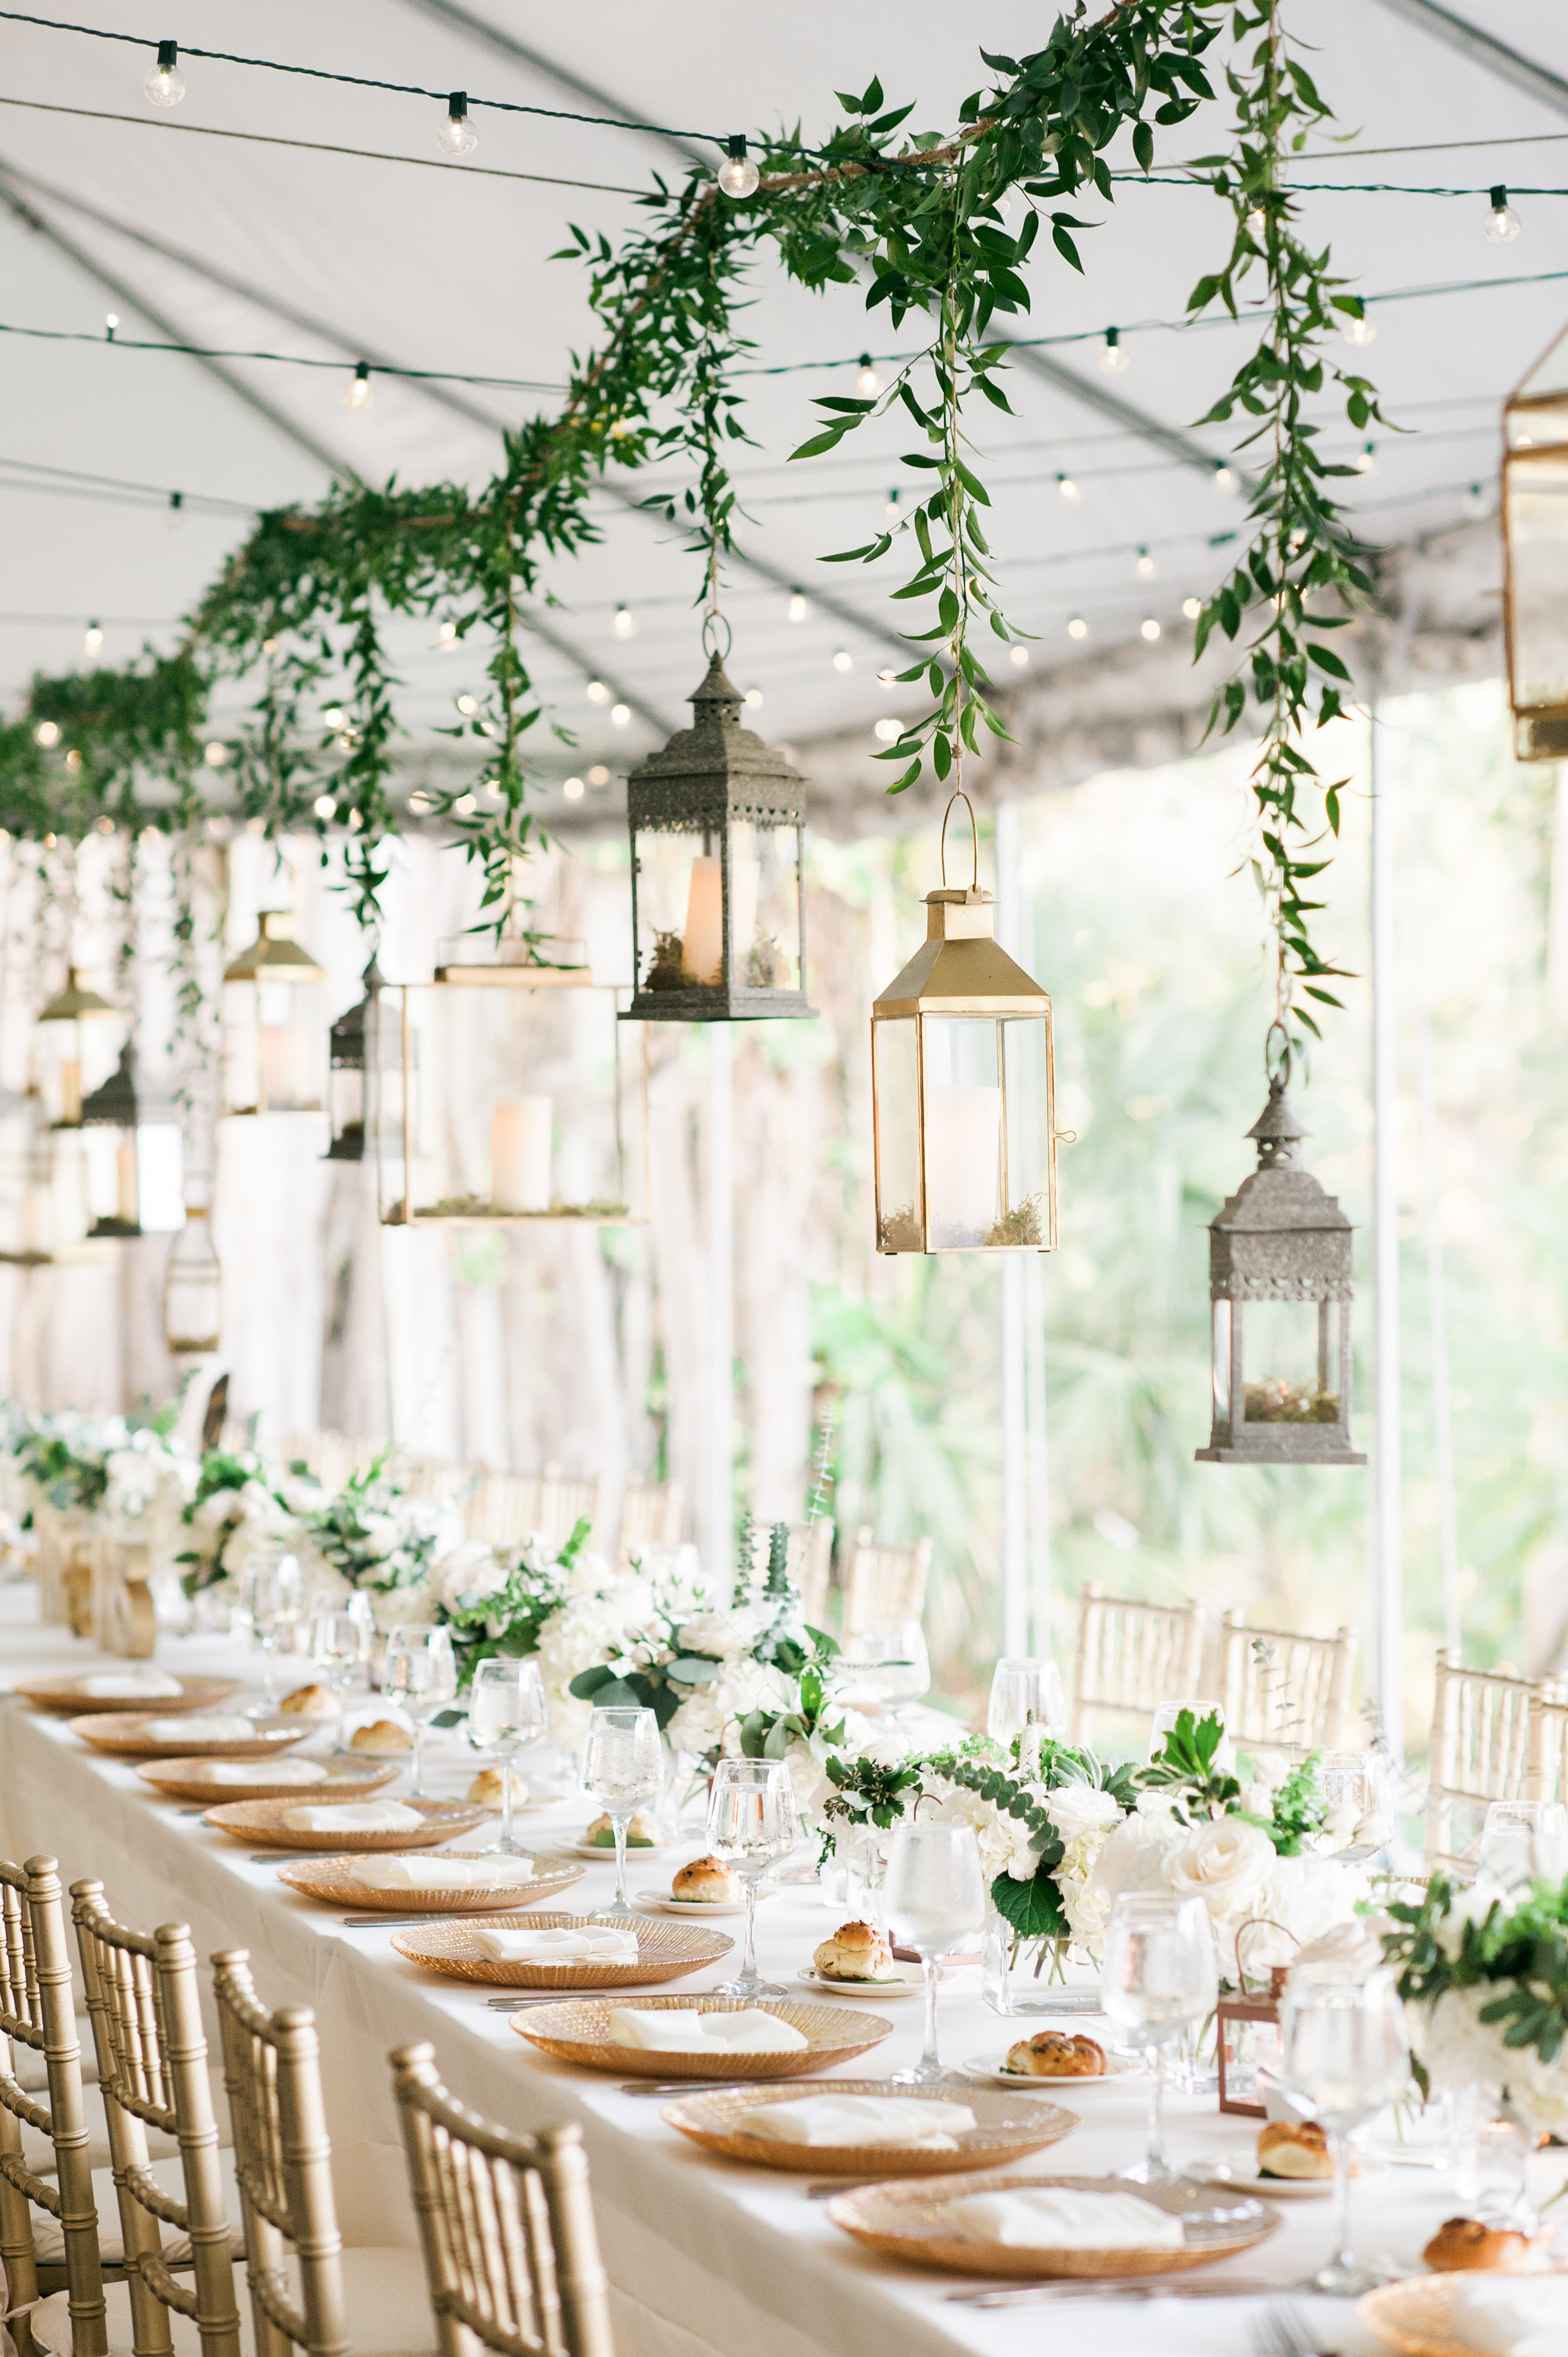 28 Tent Decorating Ideas That Will Upgrade Your Wedding ...